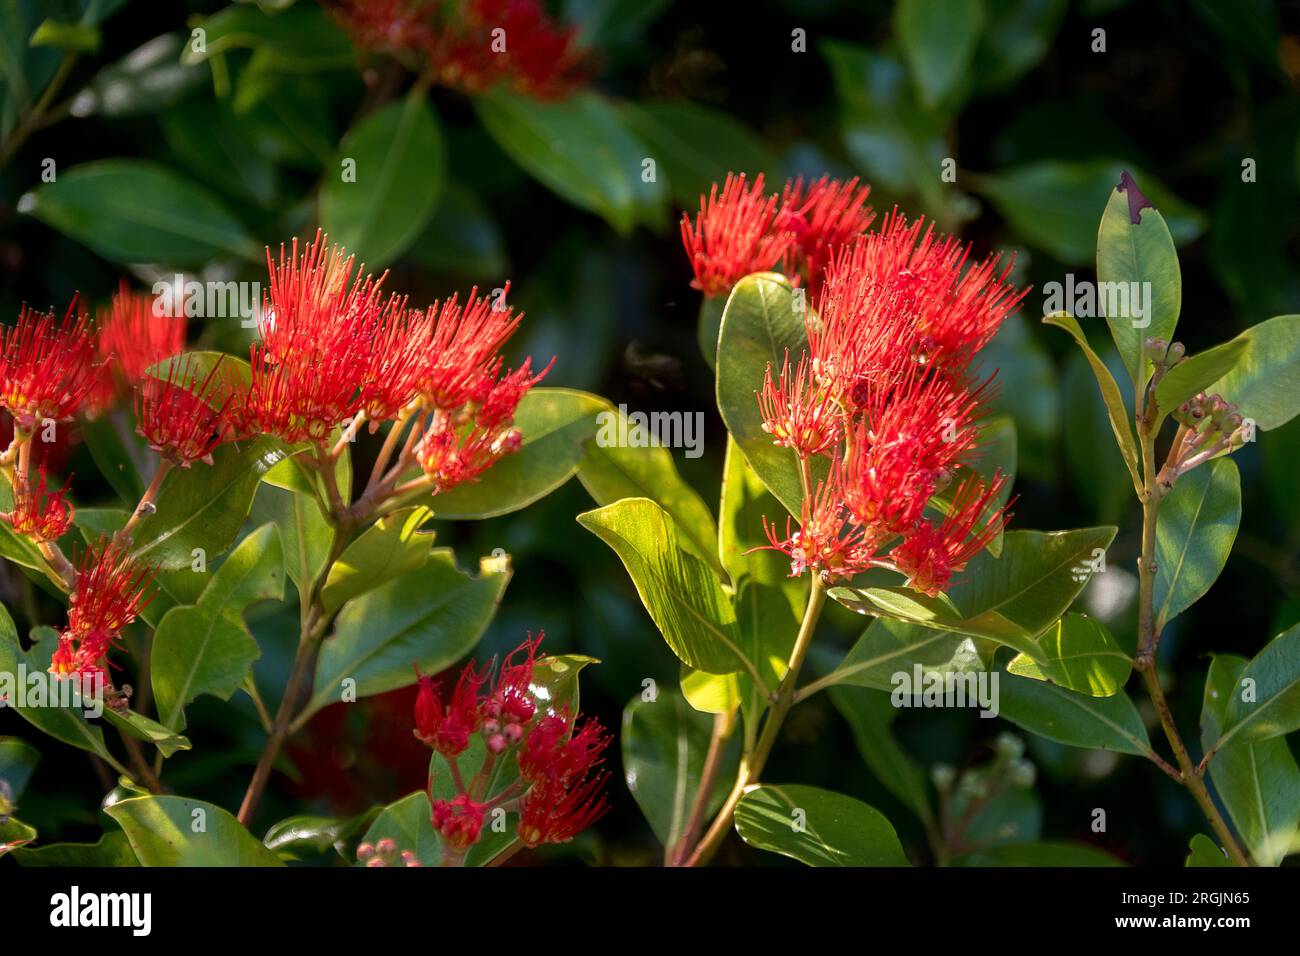 Bright red fluffy flowers of Metrosideros collina, 'Spring Fire', variety of  New Zealand Christmas bush in Queensland garden, Australia. Summer. Stock Photo